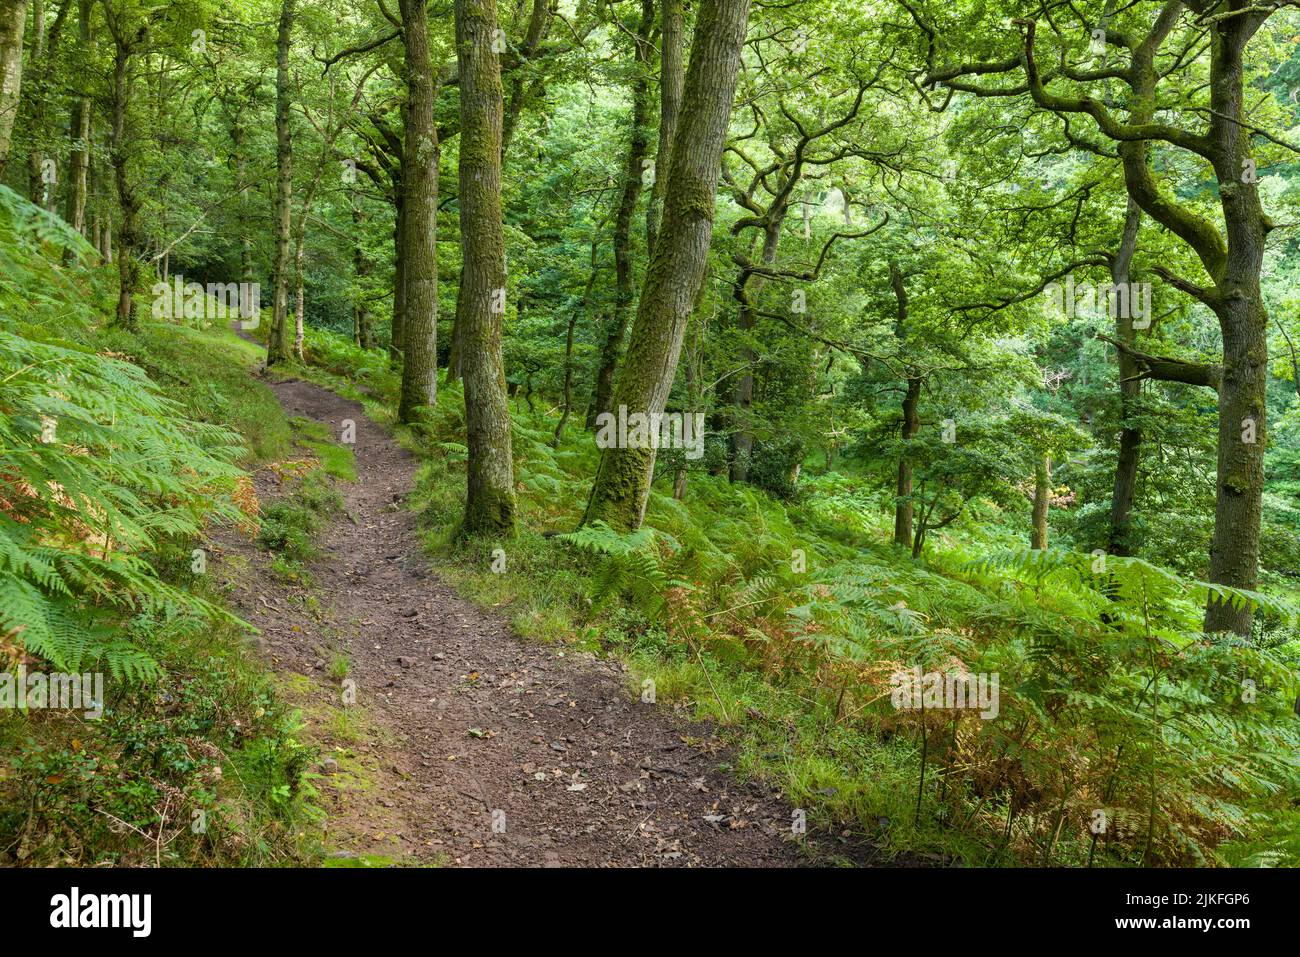 The bridleway descending into the woodland at Somerton Combe from Lower Hare Knap in the Quantock Hills, Somerset, England. Stock Photo